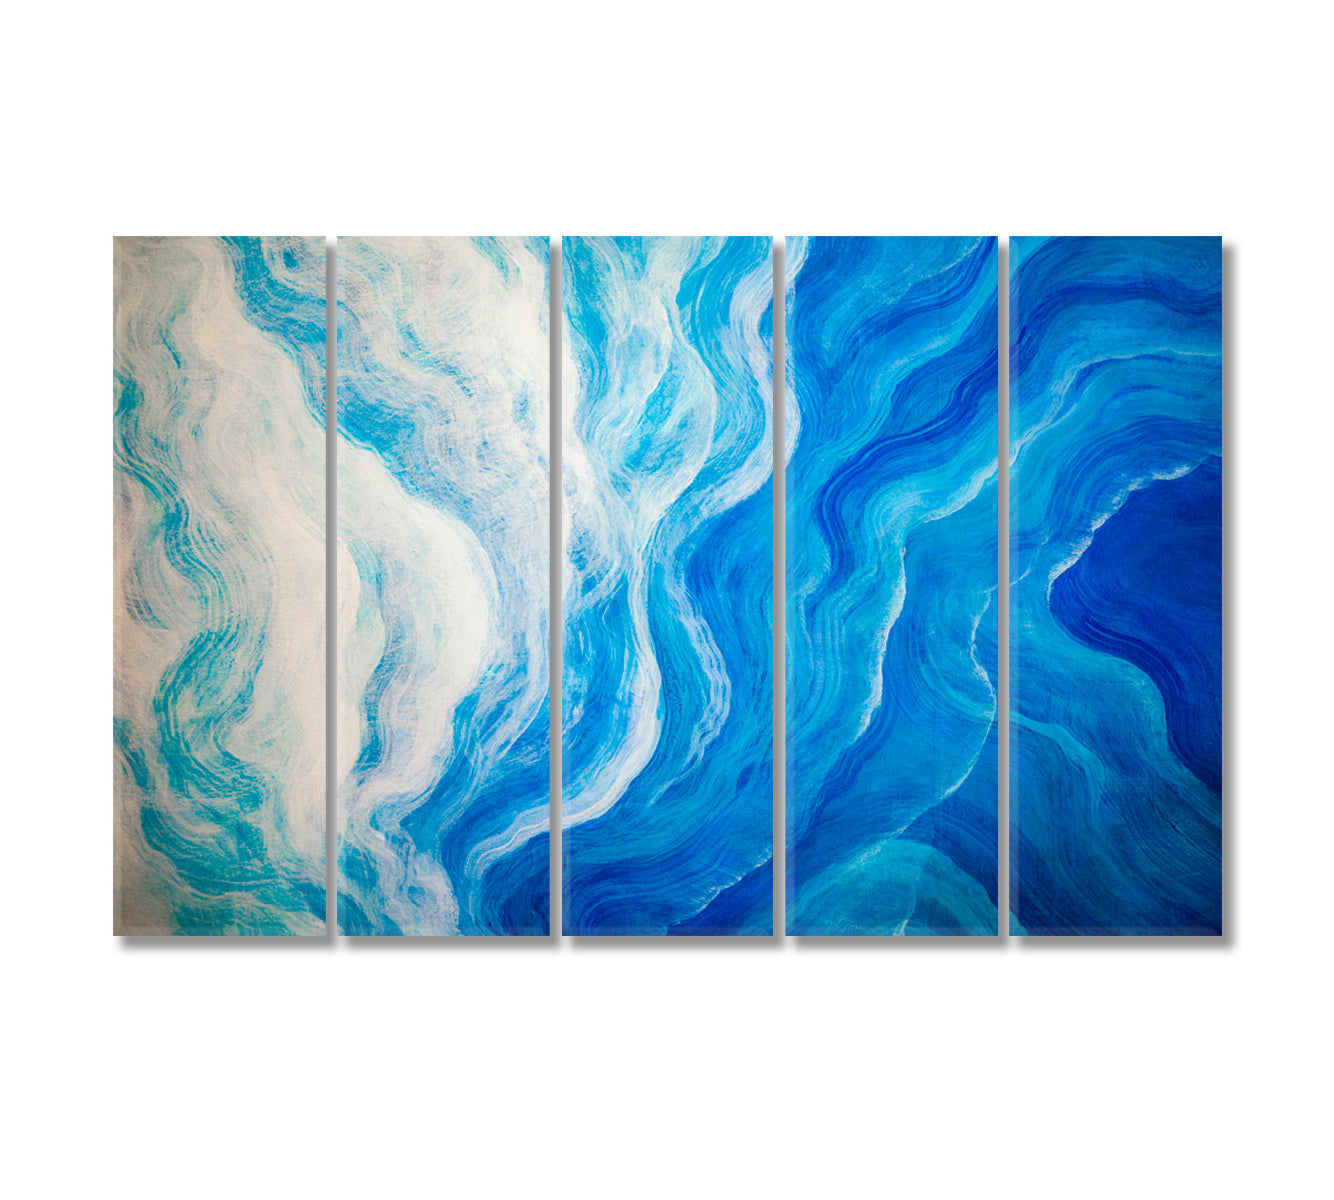 White and Blue Wave Lines Canvas Print-Canvas Print-CetArt-5 Panels-36x24 inches-CetArt